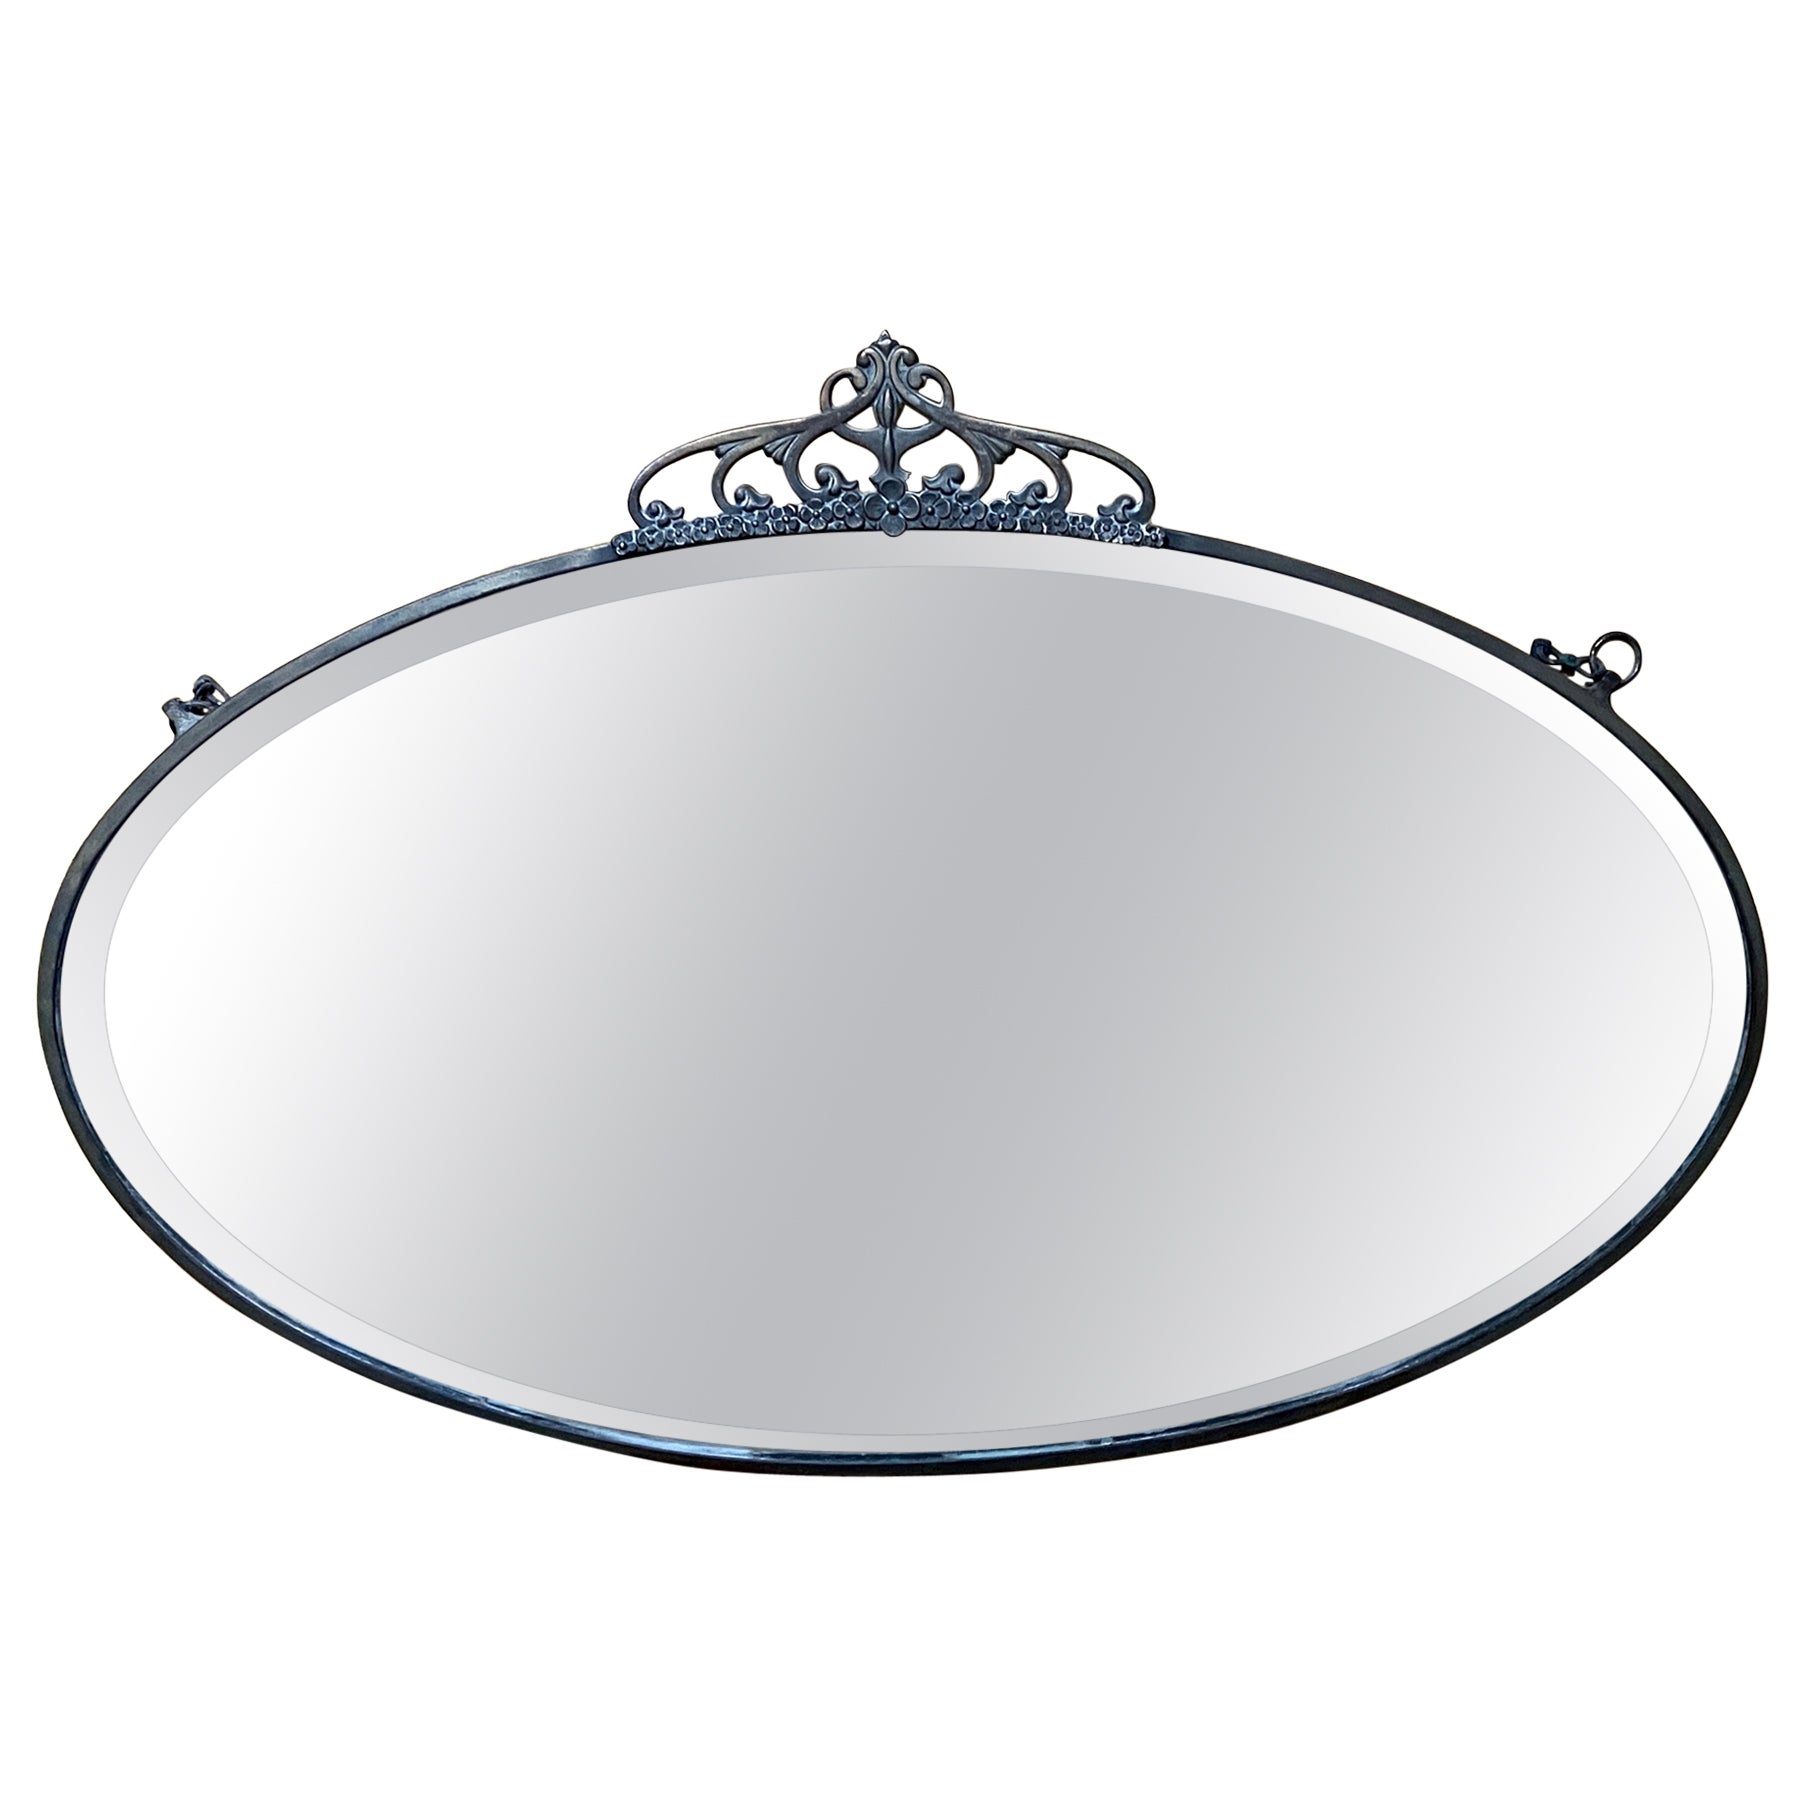 Oval antique Art Nouveau mirror with a thin brass frame and crown  For Sale